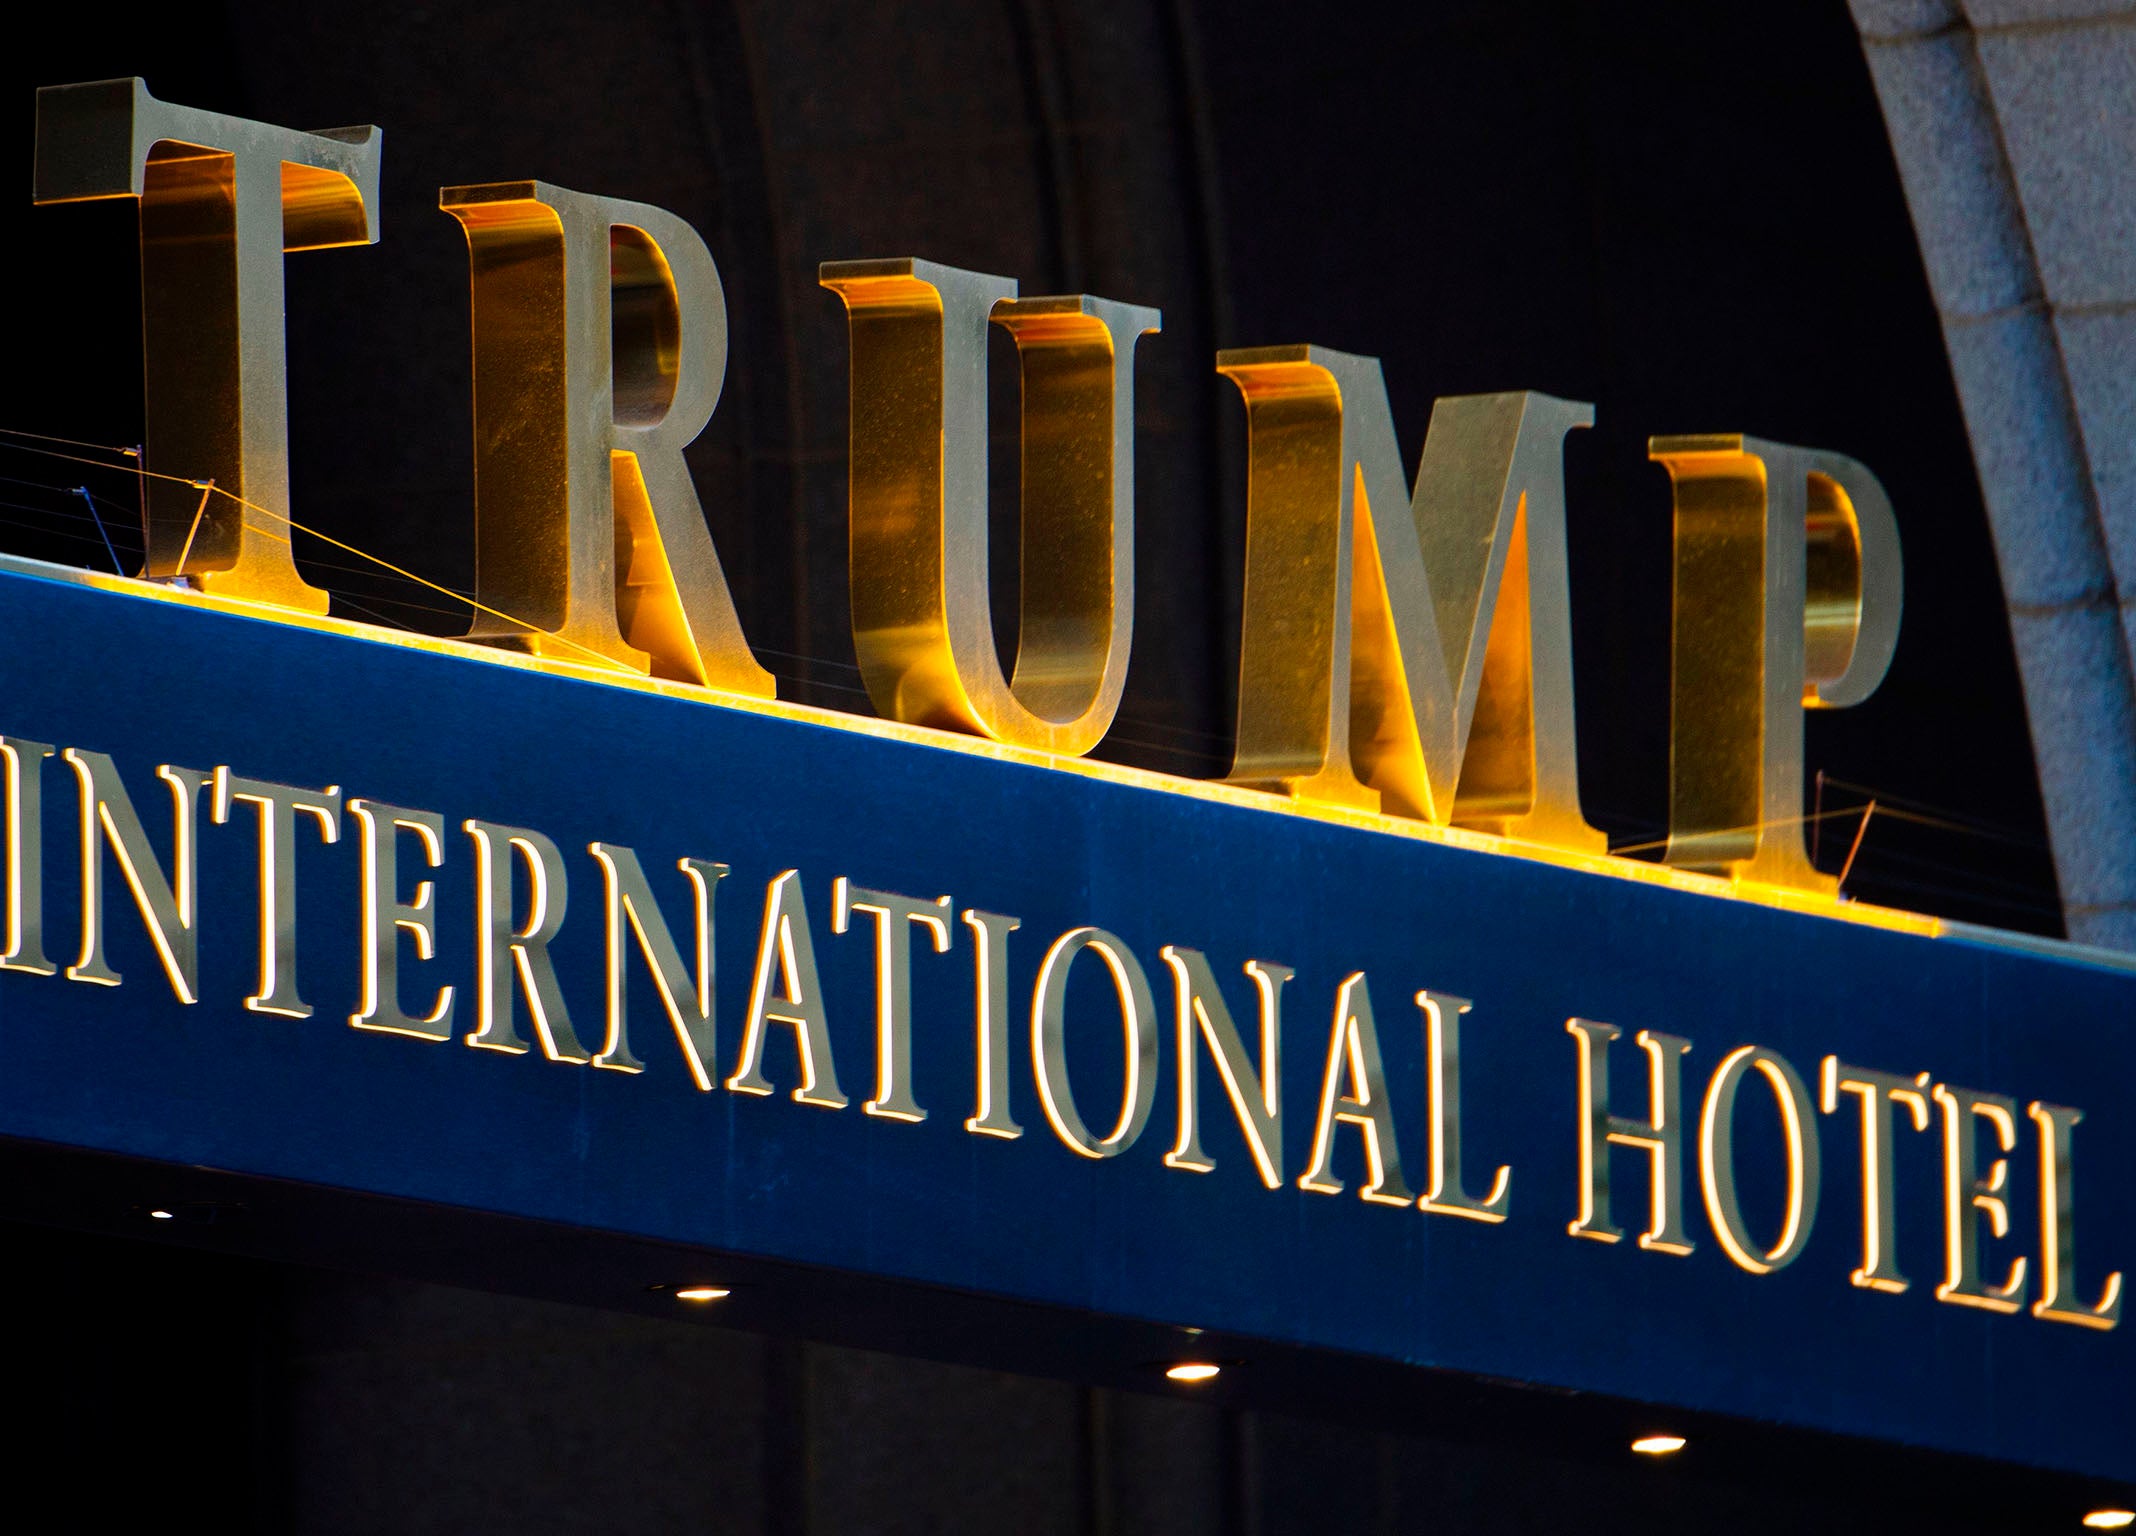 A man was arrested for having an automatic firearm while staying at Trump International Hotel